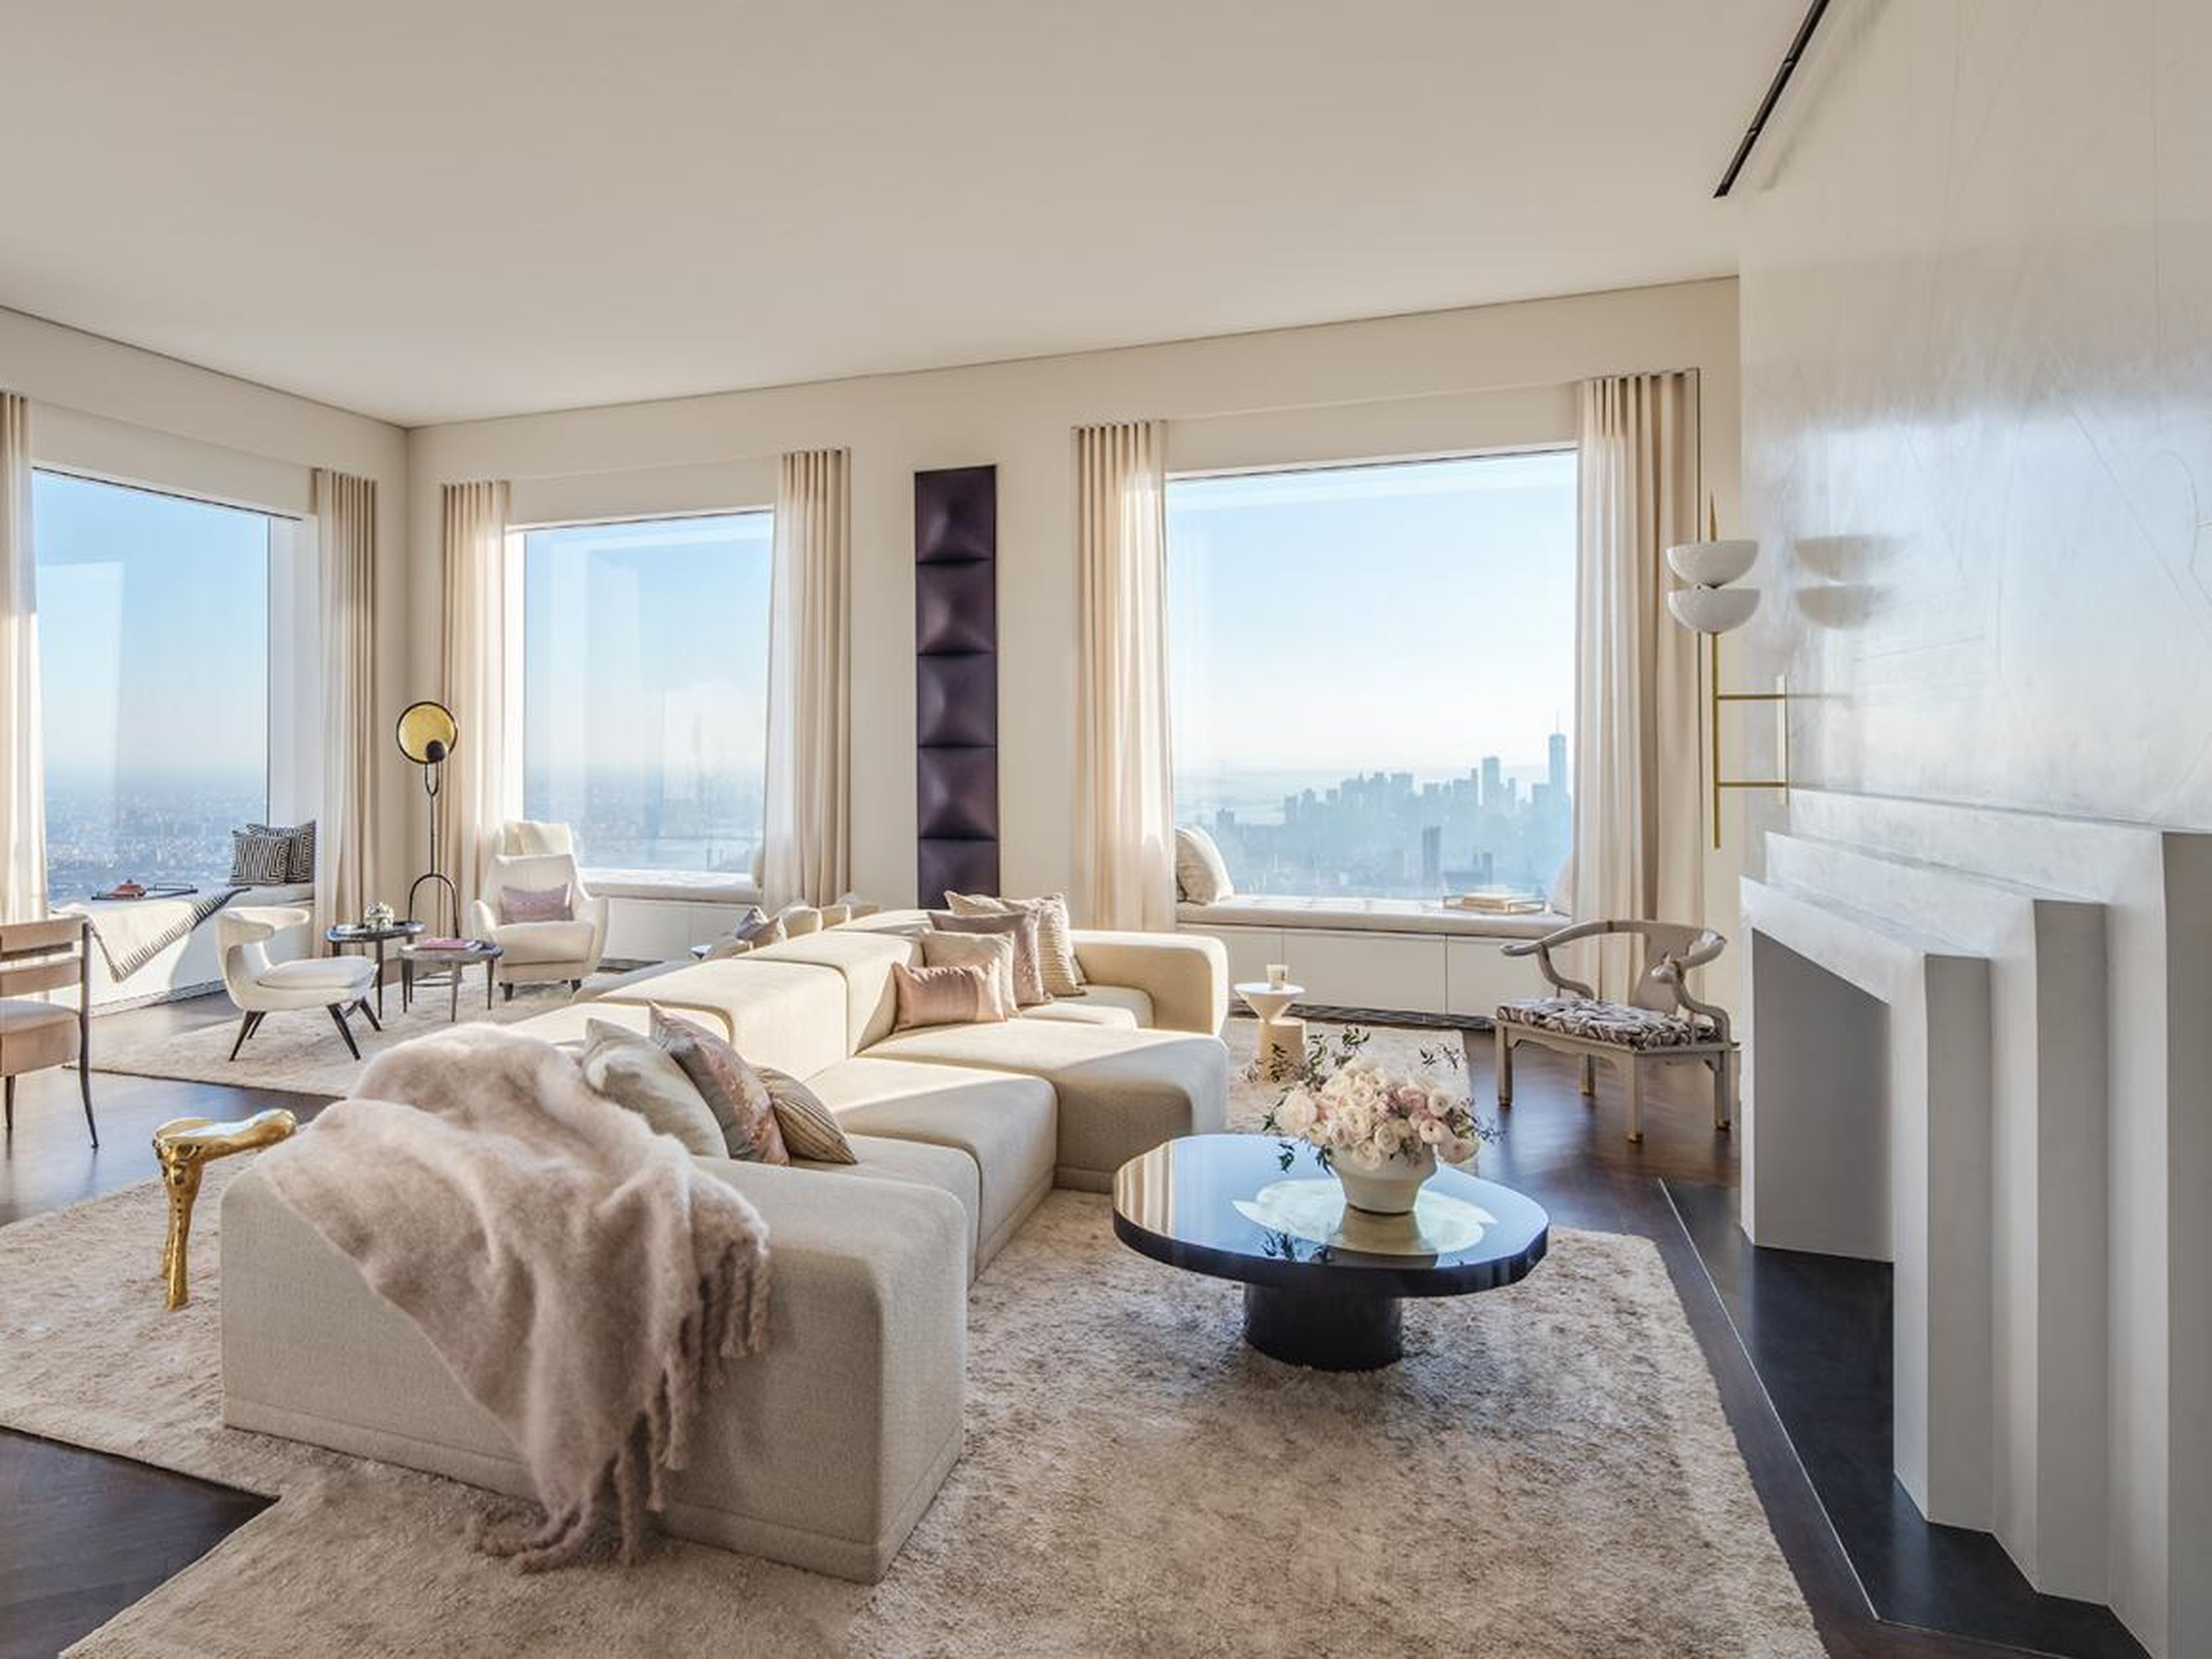 The expansive 8,255-square-foot penthouse on the 95th floor included six bedrooms and seven bathrooms until it was split into two separate three-bedroom condos.